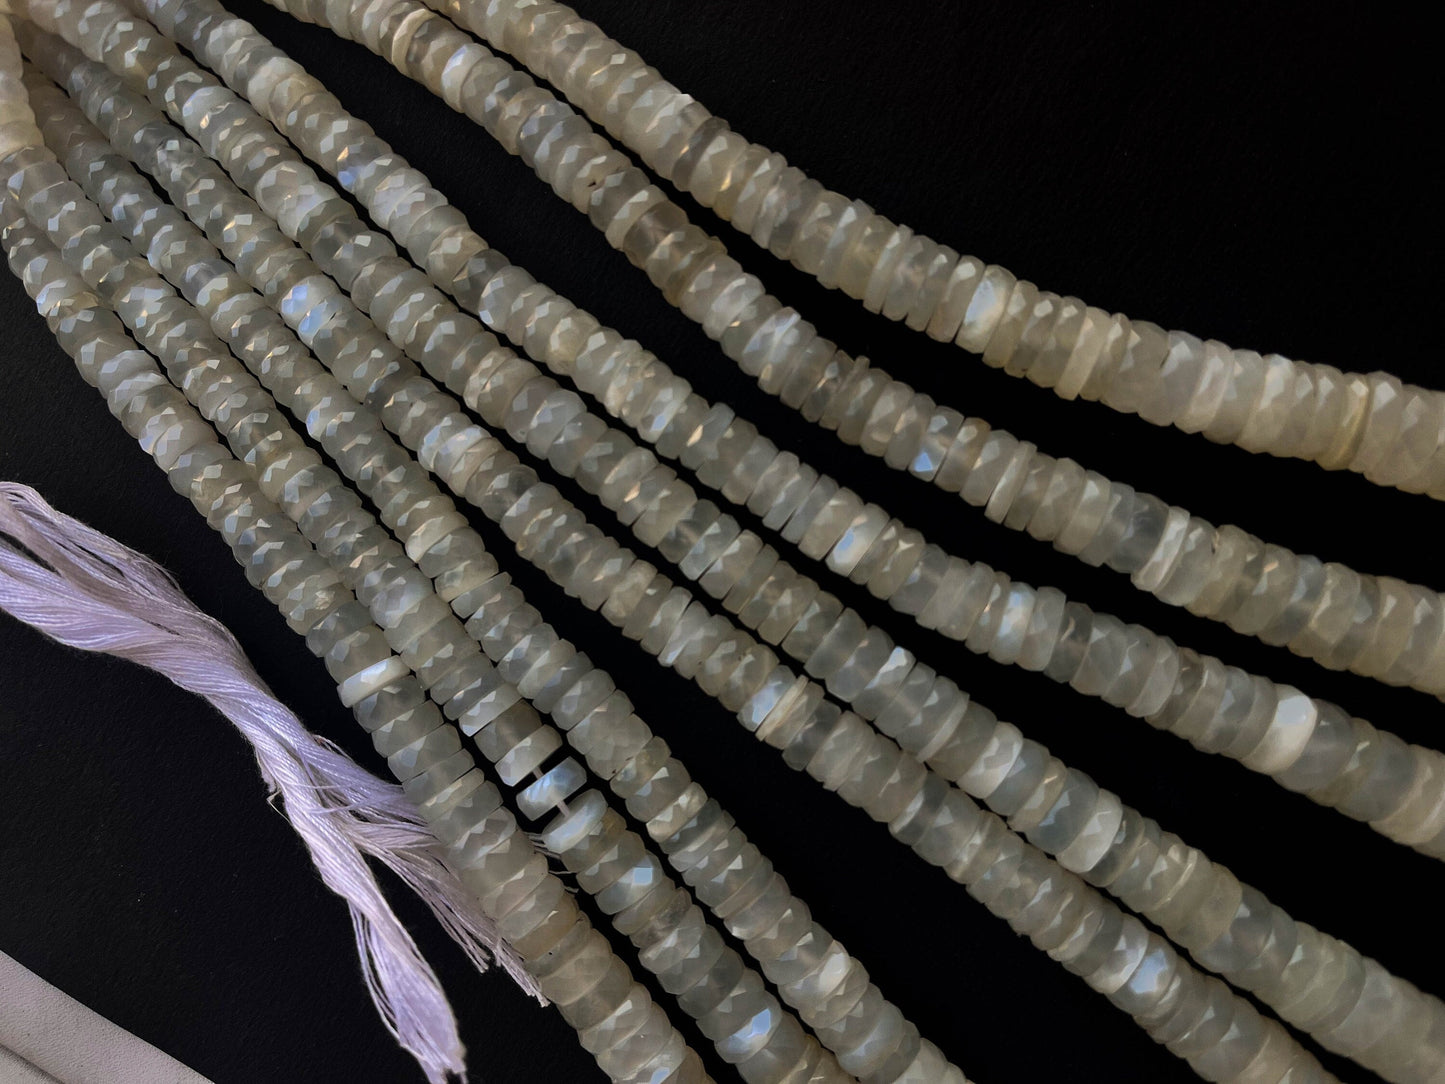 16 Inch AAA White Moonstone Faceted Heishi Shape Beads, White Moonstone Beads, White Moonstone Heishi, Natural White Moonstone Gemstone Beadsforyourjewelry